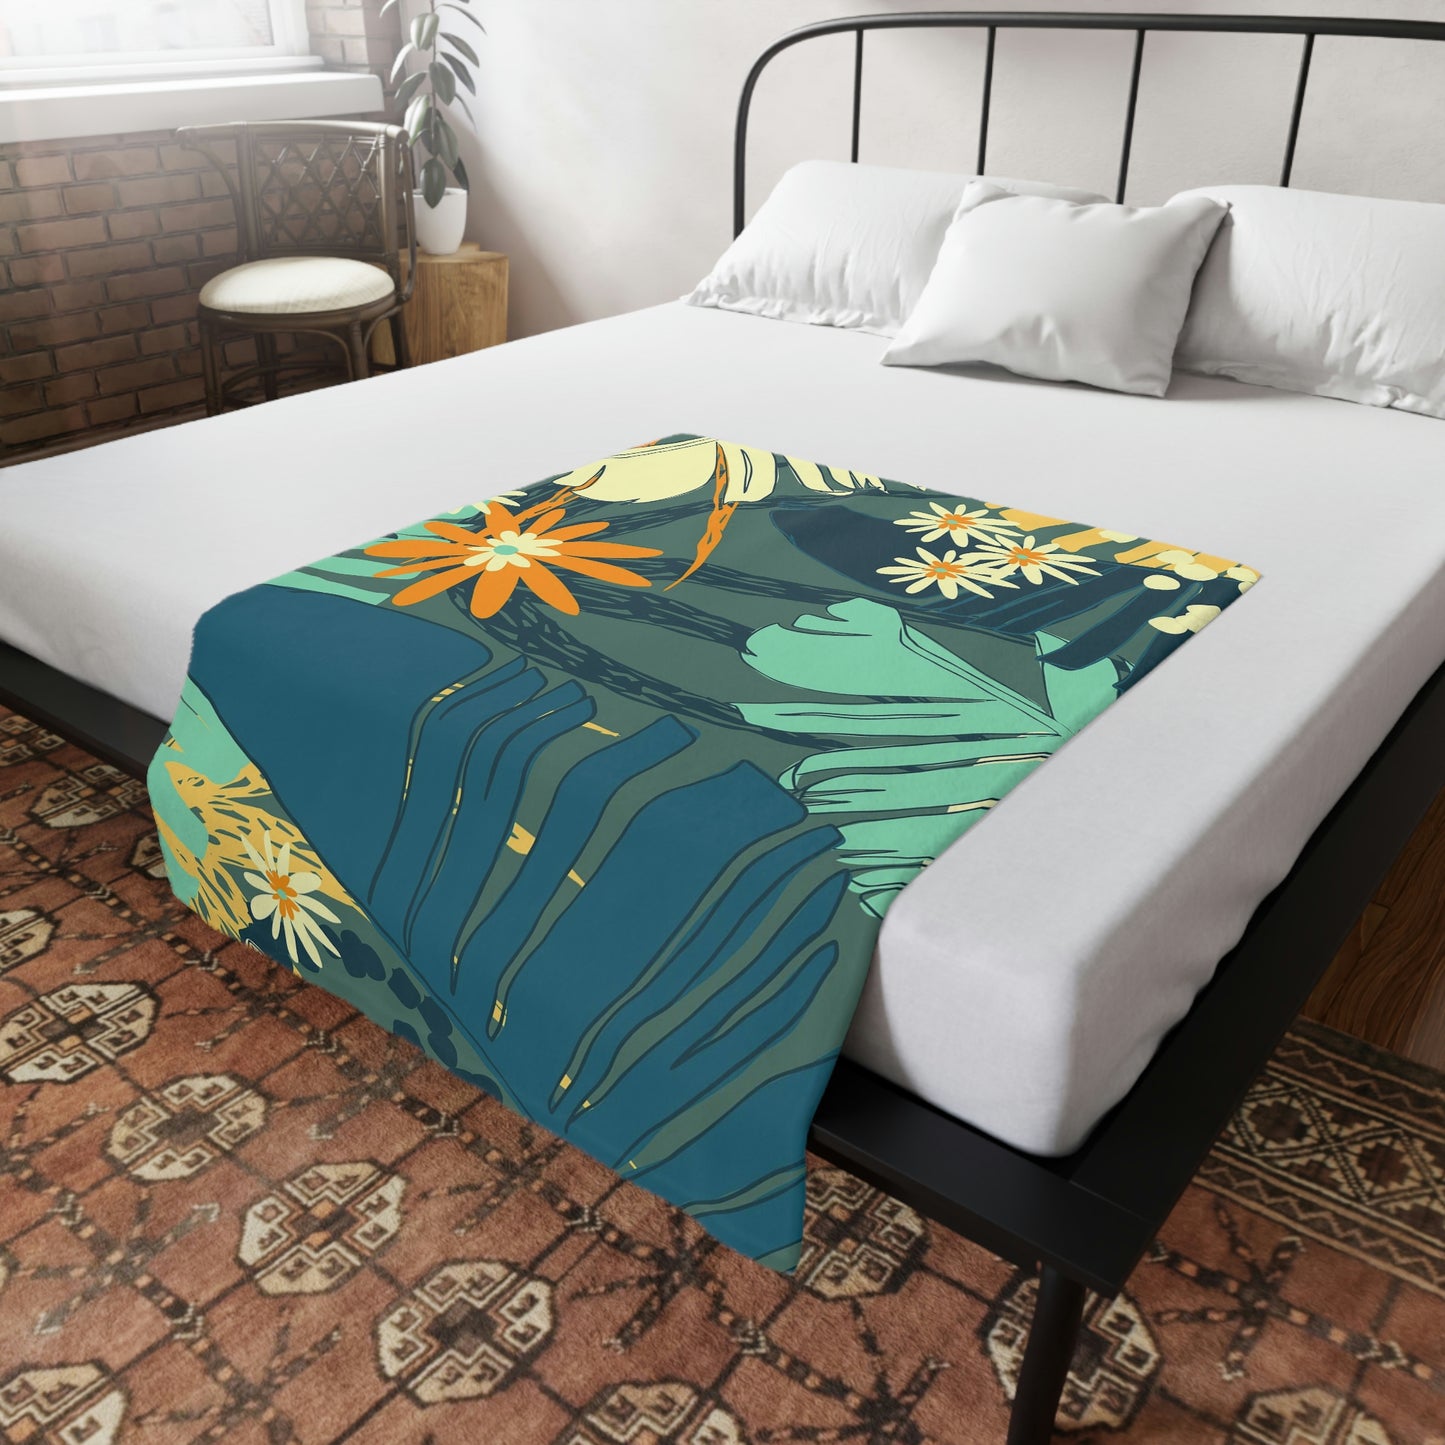 Jungle Blues Plush Fleece Blanket, Tropical Print Blanket for your Vacation or Airbnb Home